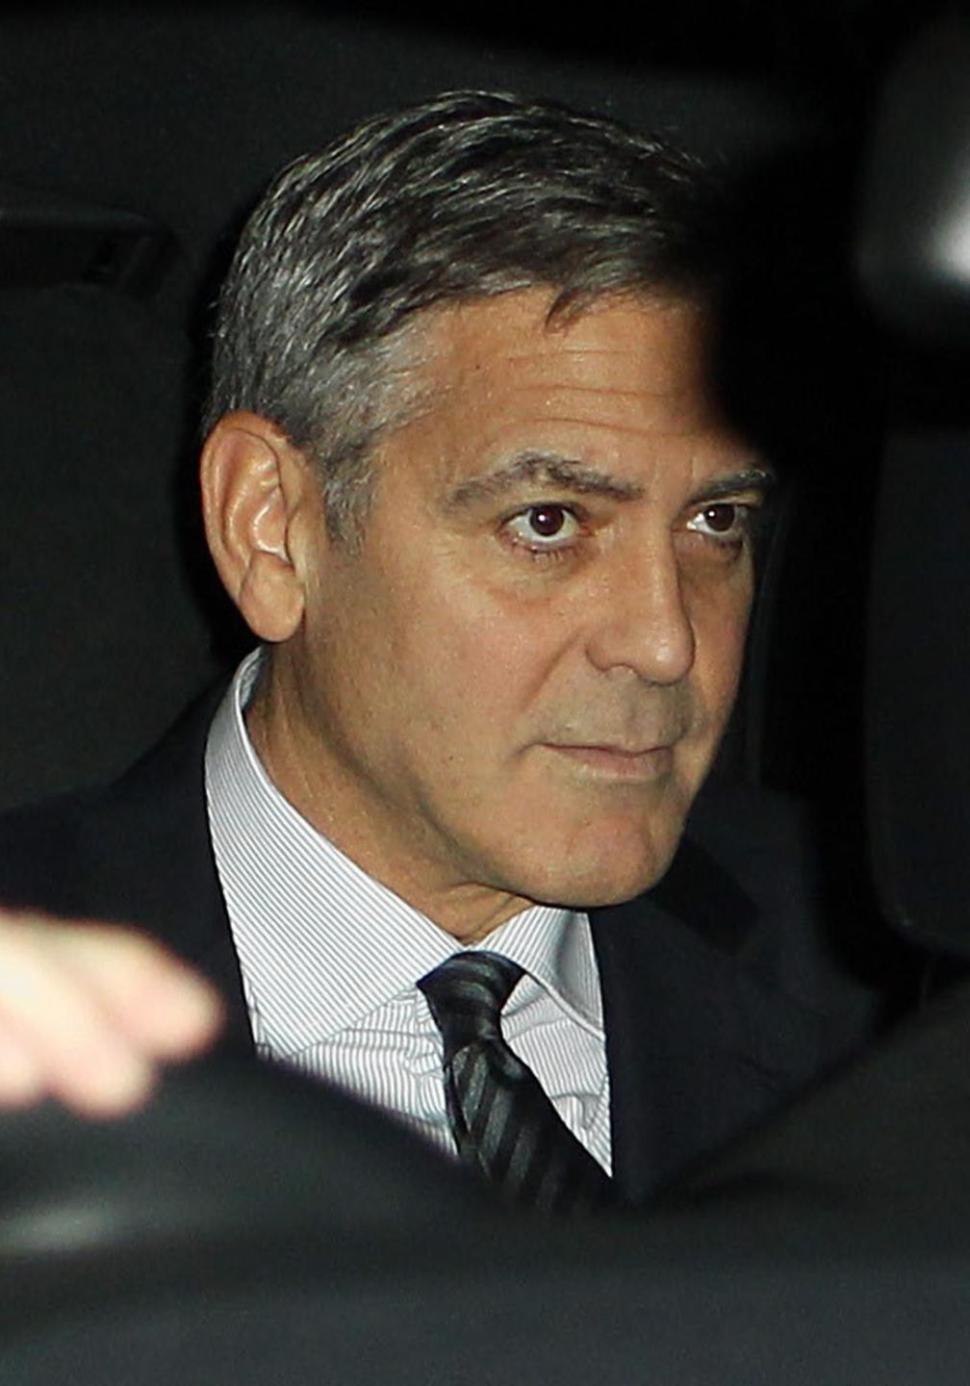 George Clooney rides in car with wife Amal Alamuddin on Saturday to British wedding bash thrown by his new in-laws.